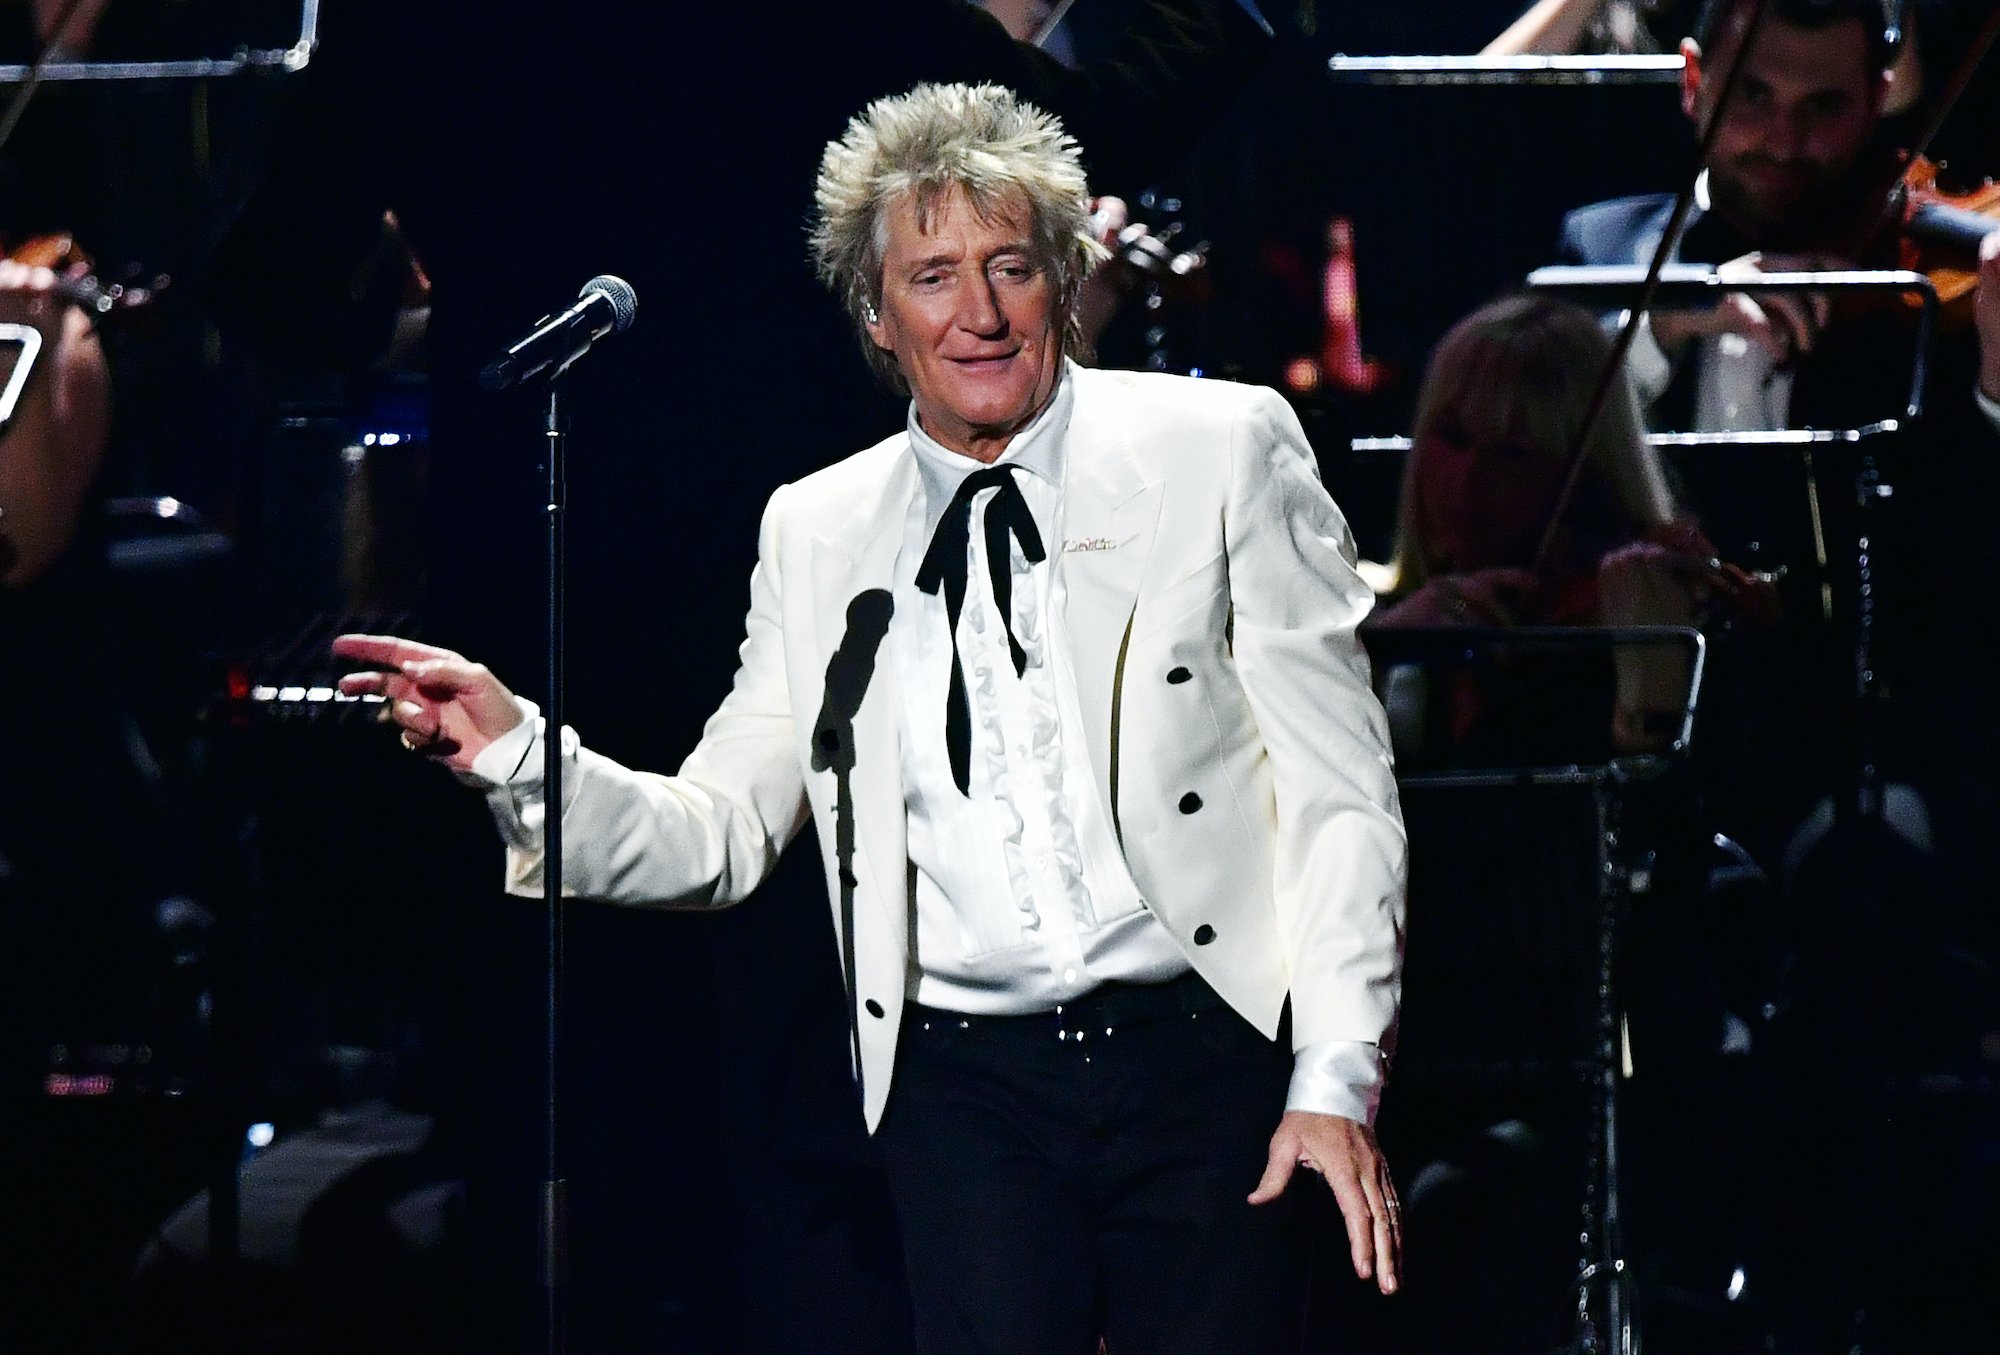 Rod Stewart Spent 23 Years Quietly Building an Enormous Model Train Set